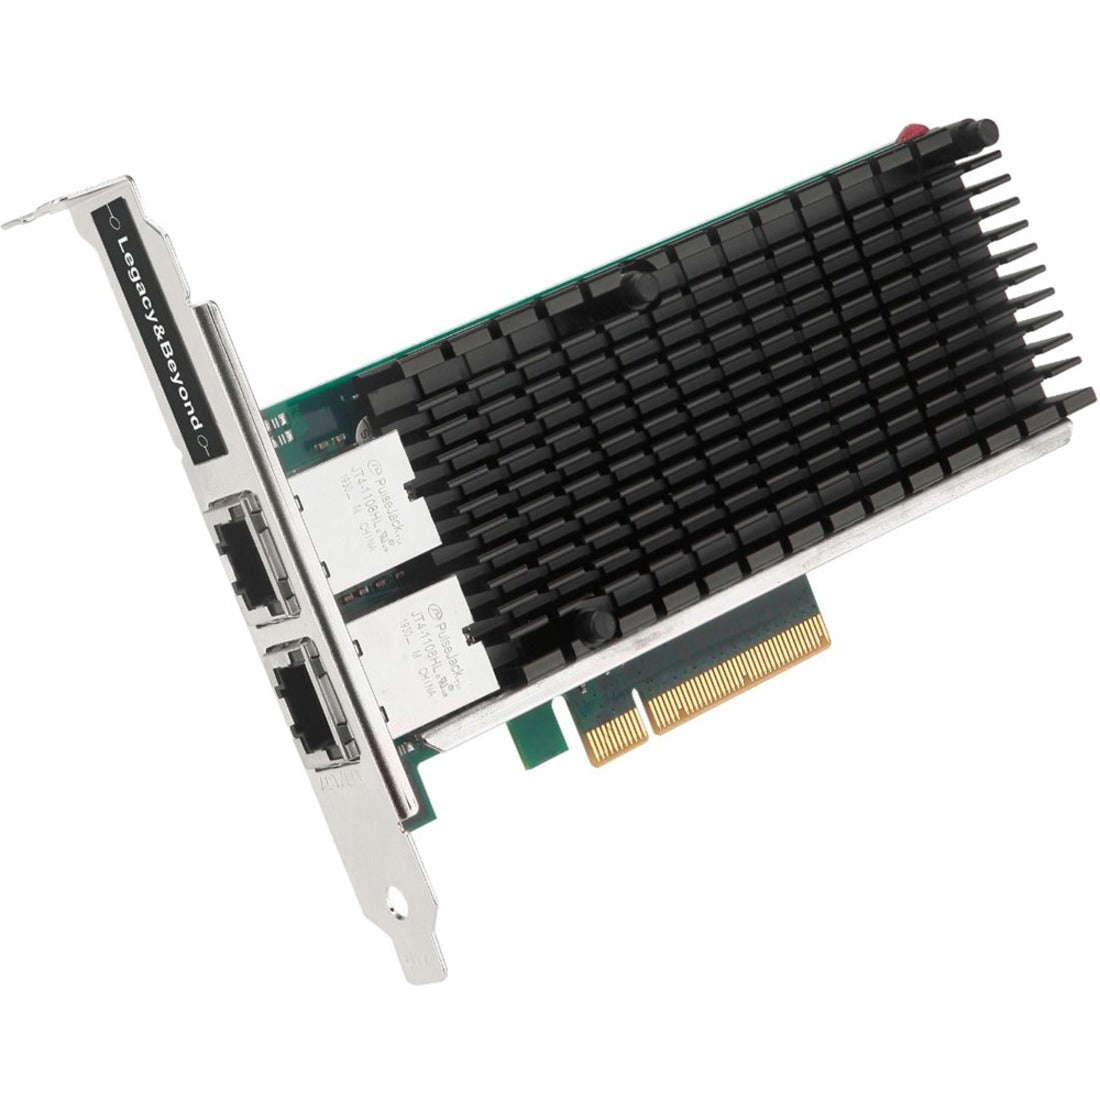 SIIG LB-GE0311-S1 Dual Port 10G Ethernet Network PCI Express, 2 Ports, Twisted Pair, 10GBase-T